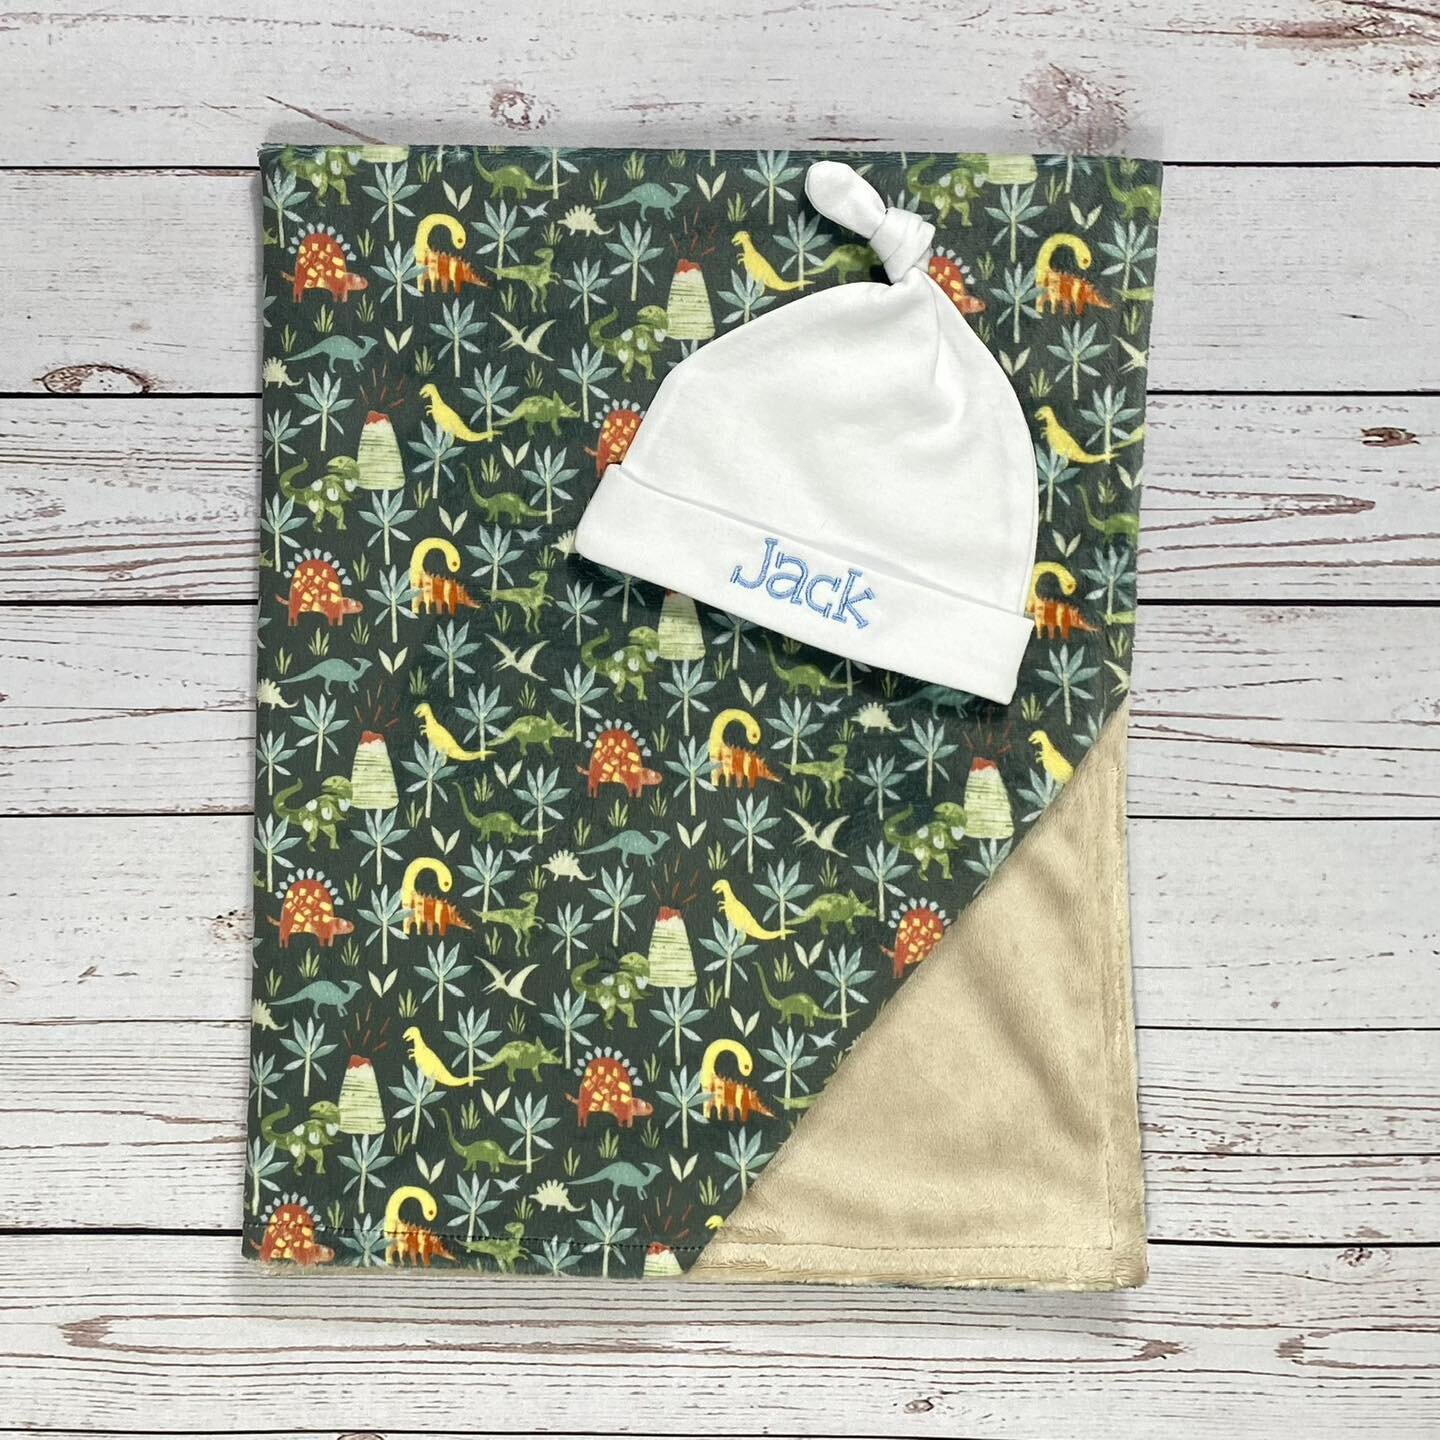 This minky blanket paired with a personalized hat make a DINO-mite gift set for a baby shower this Fall 🦕🦖 #sunnysidehaven #minkyblanket #newbabygift #babyboygiftideas #babyblanketsforsale #handmadeinpa #giftfromgrandma #giftfromnana